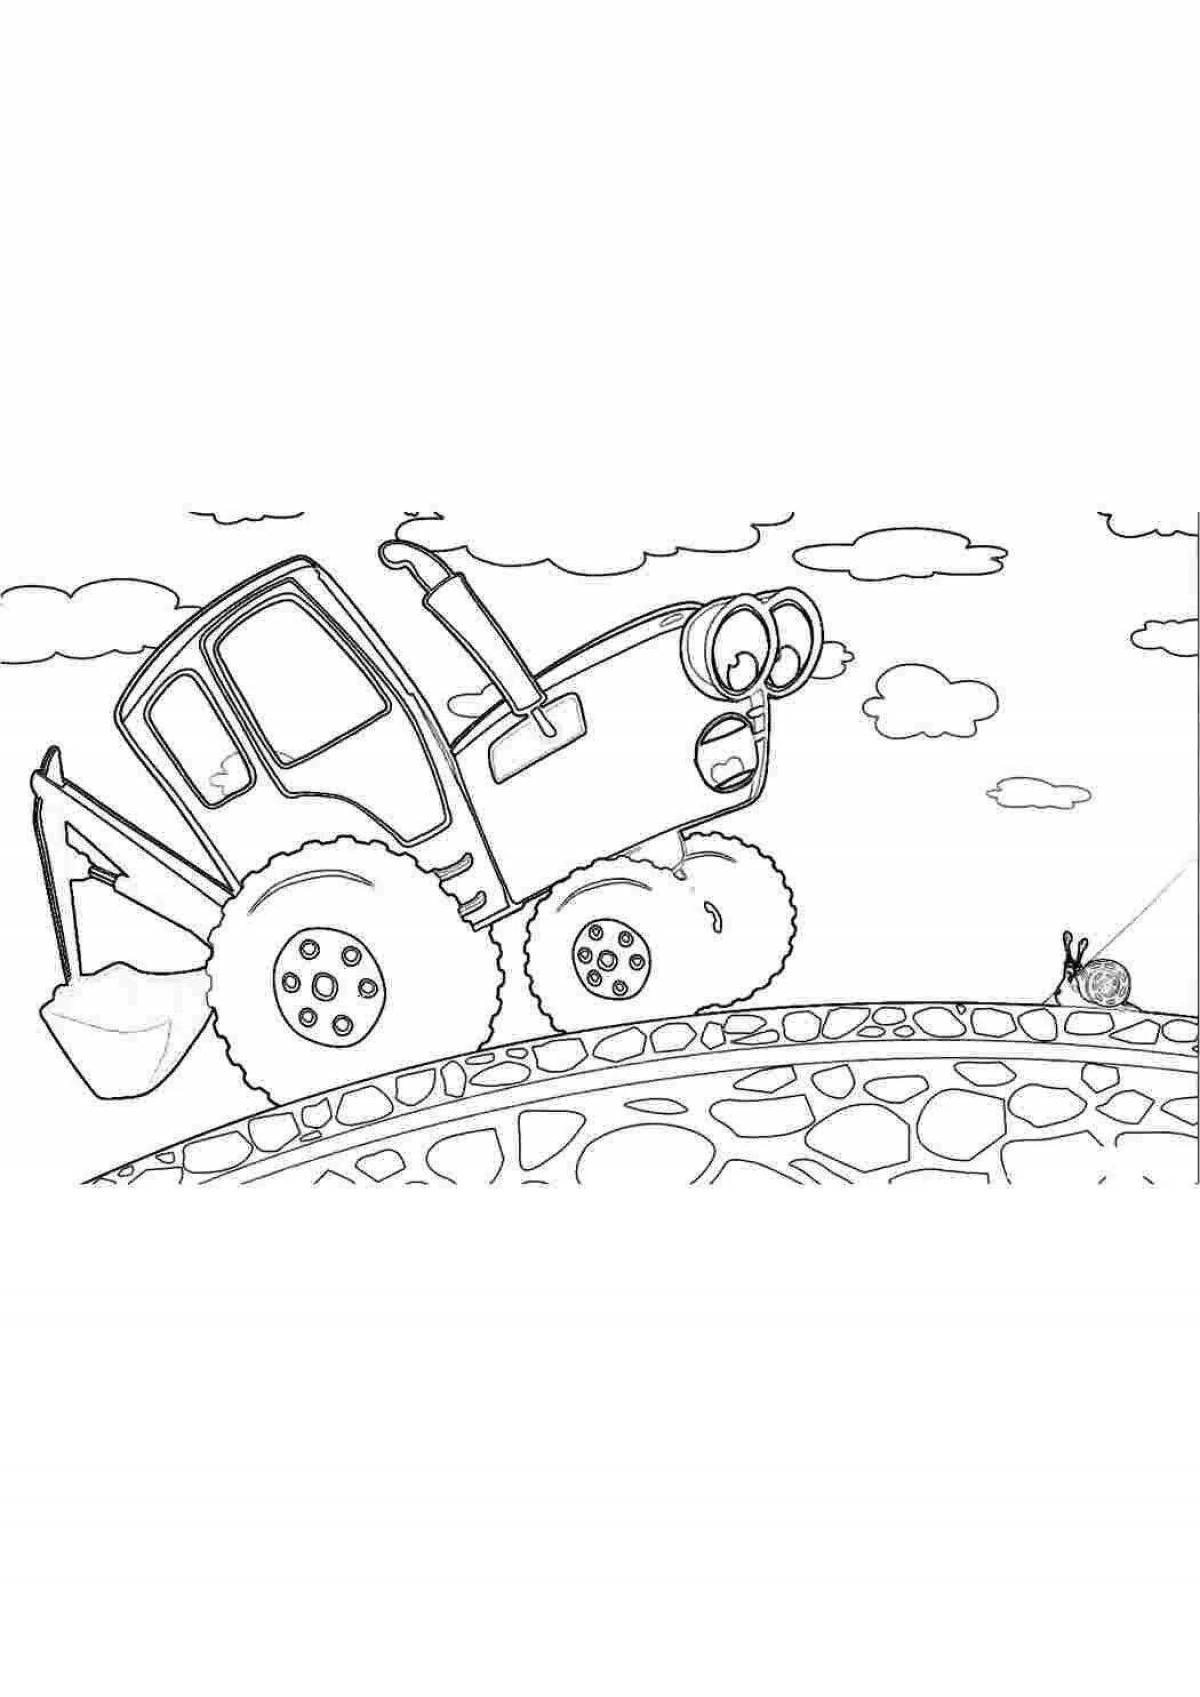 Awesome blue tractor coloring page